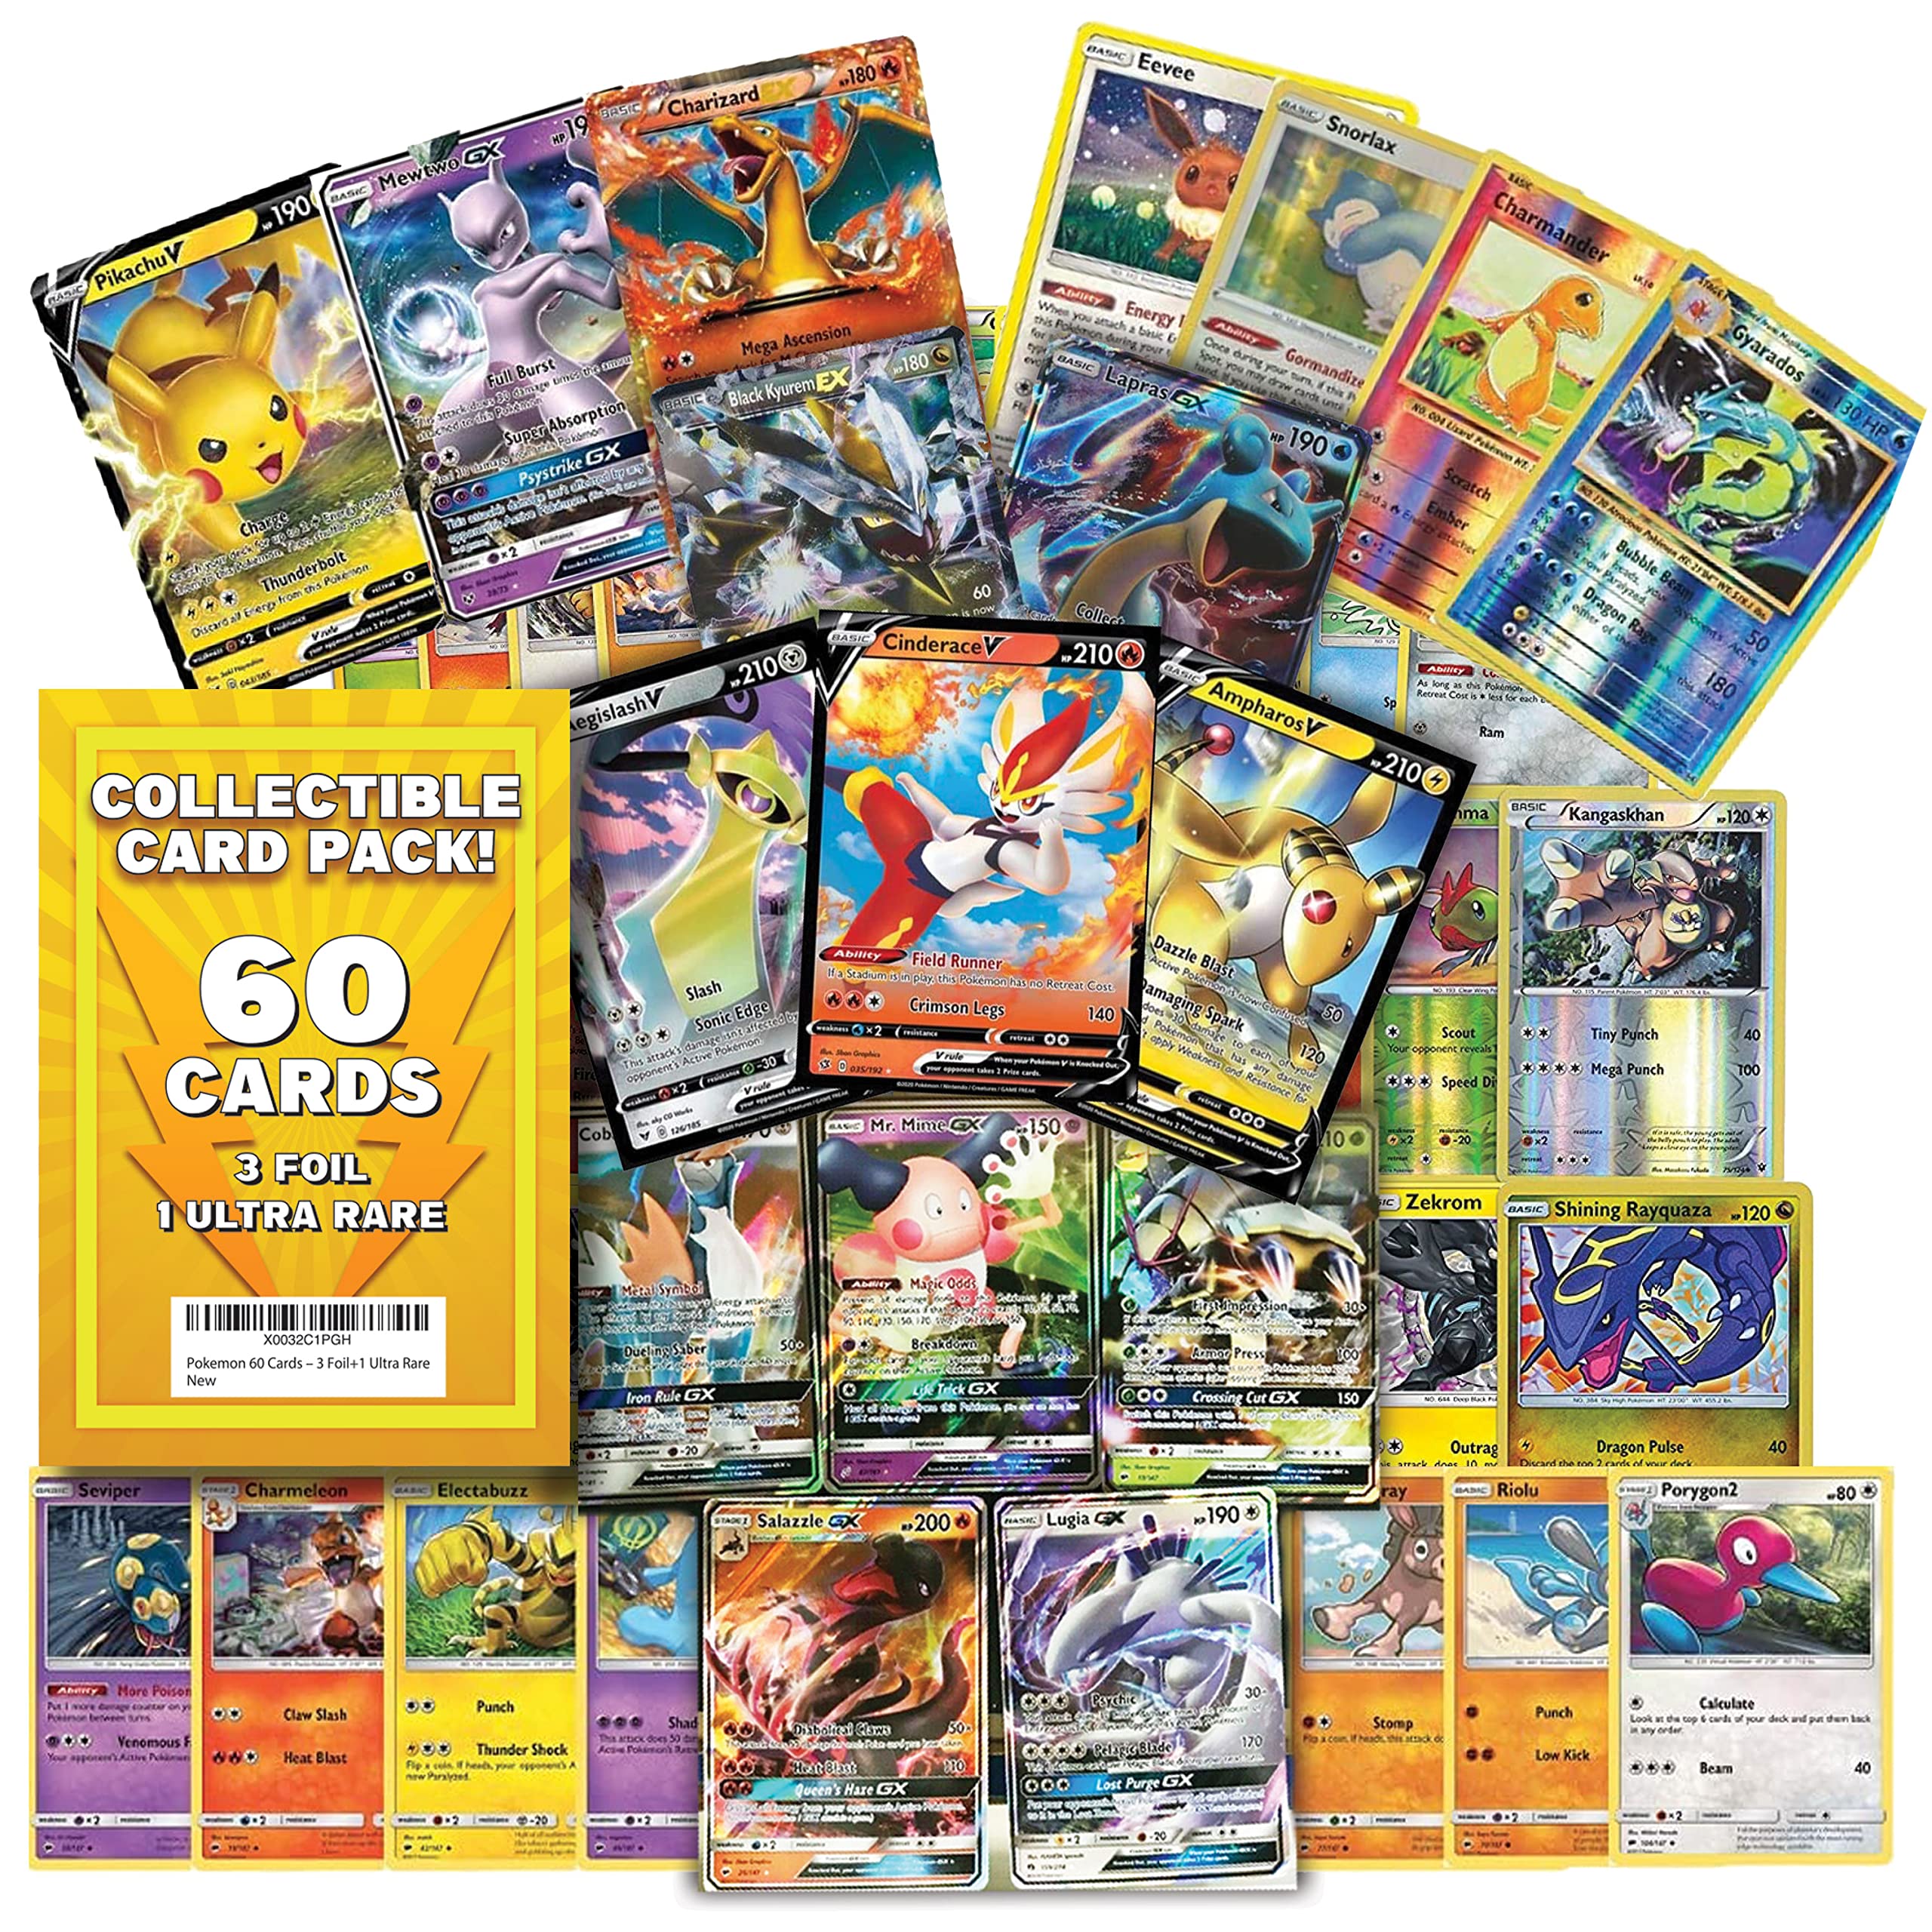 Pokemon Trading Card Game - 60 Total Card - 3 Foil Cards and 1 Ultra Rare  Card - All Cards are Authentic - Perfect for Collectors - Chance to Get an  Ultra Rare Card